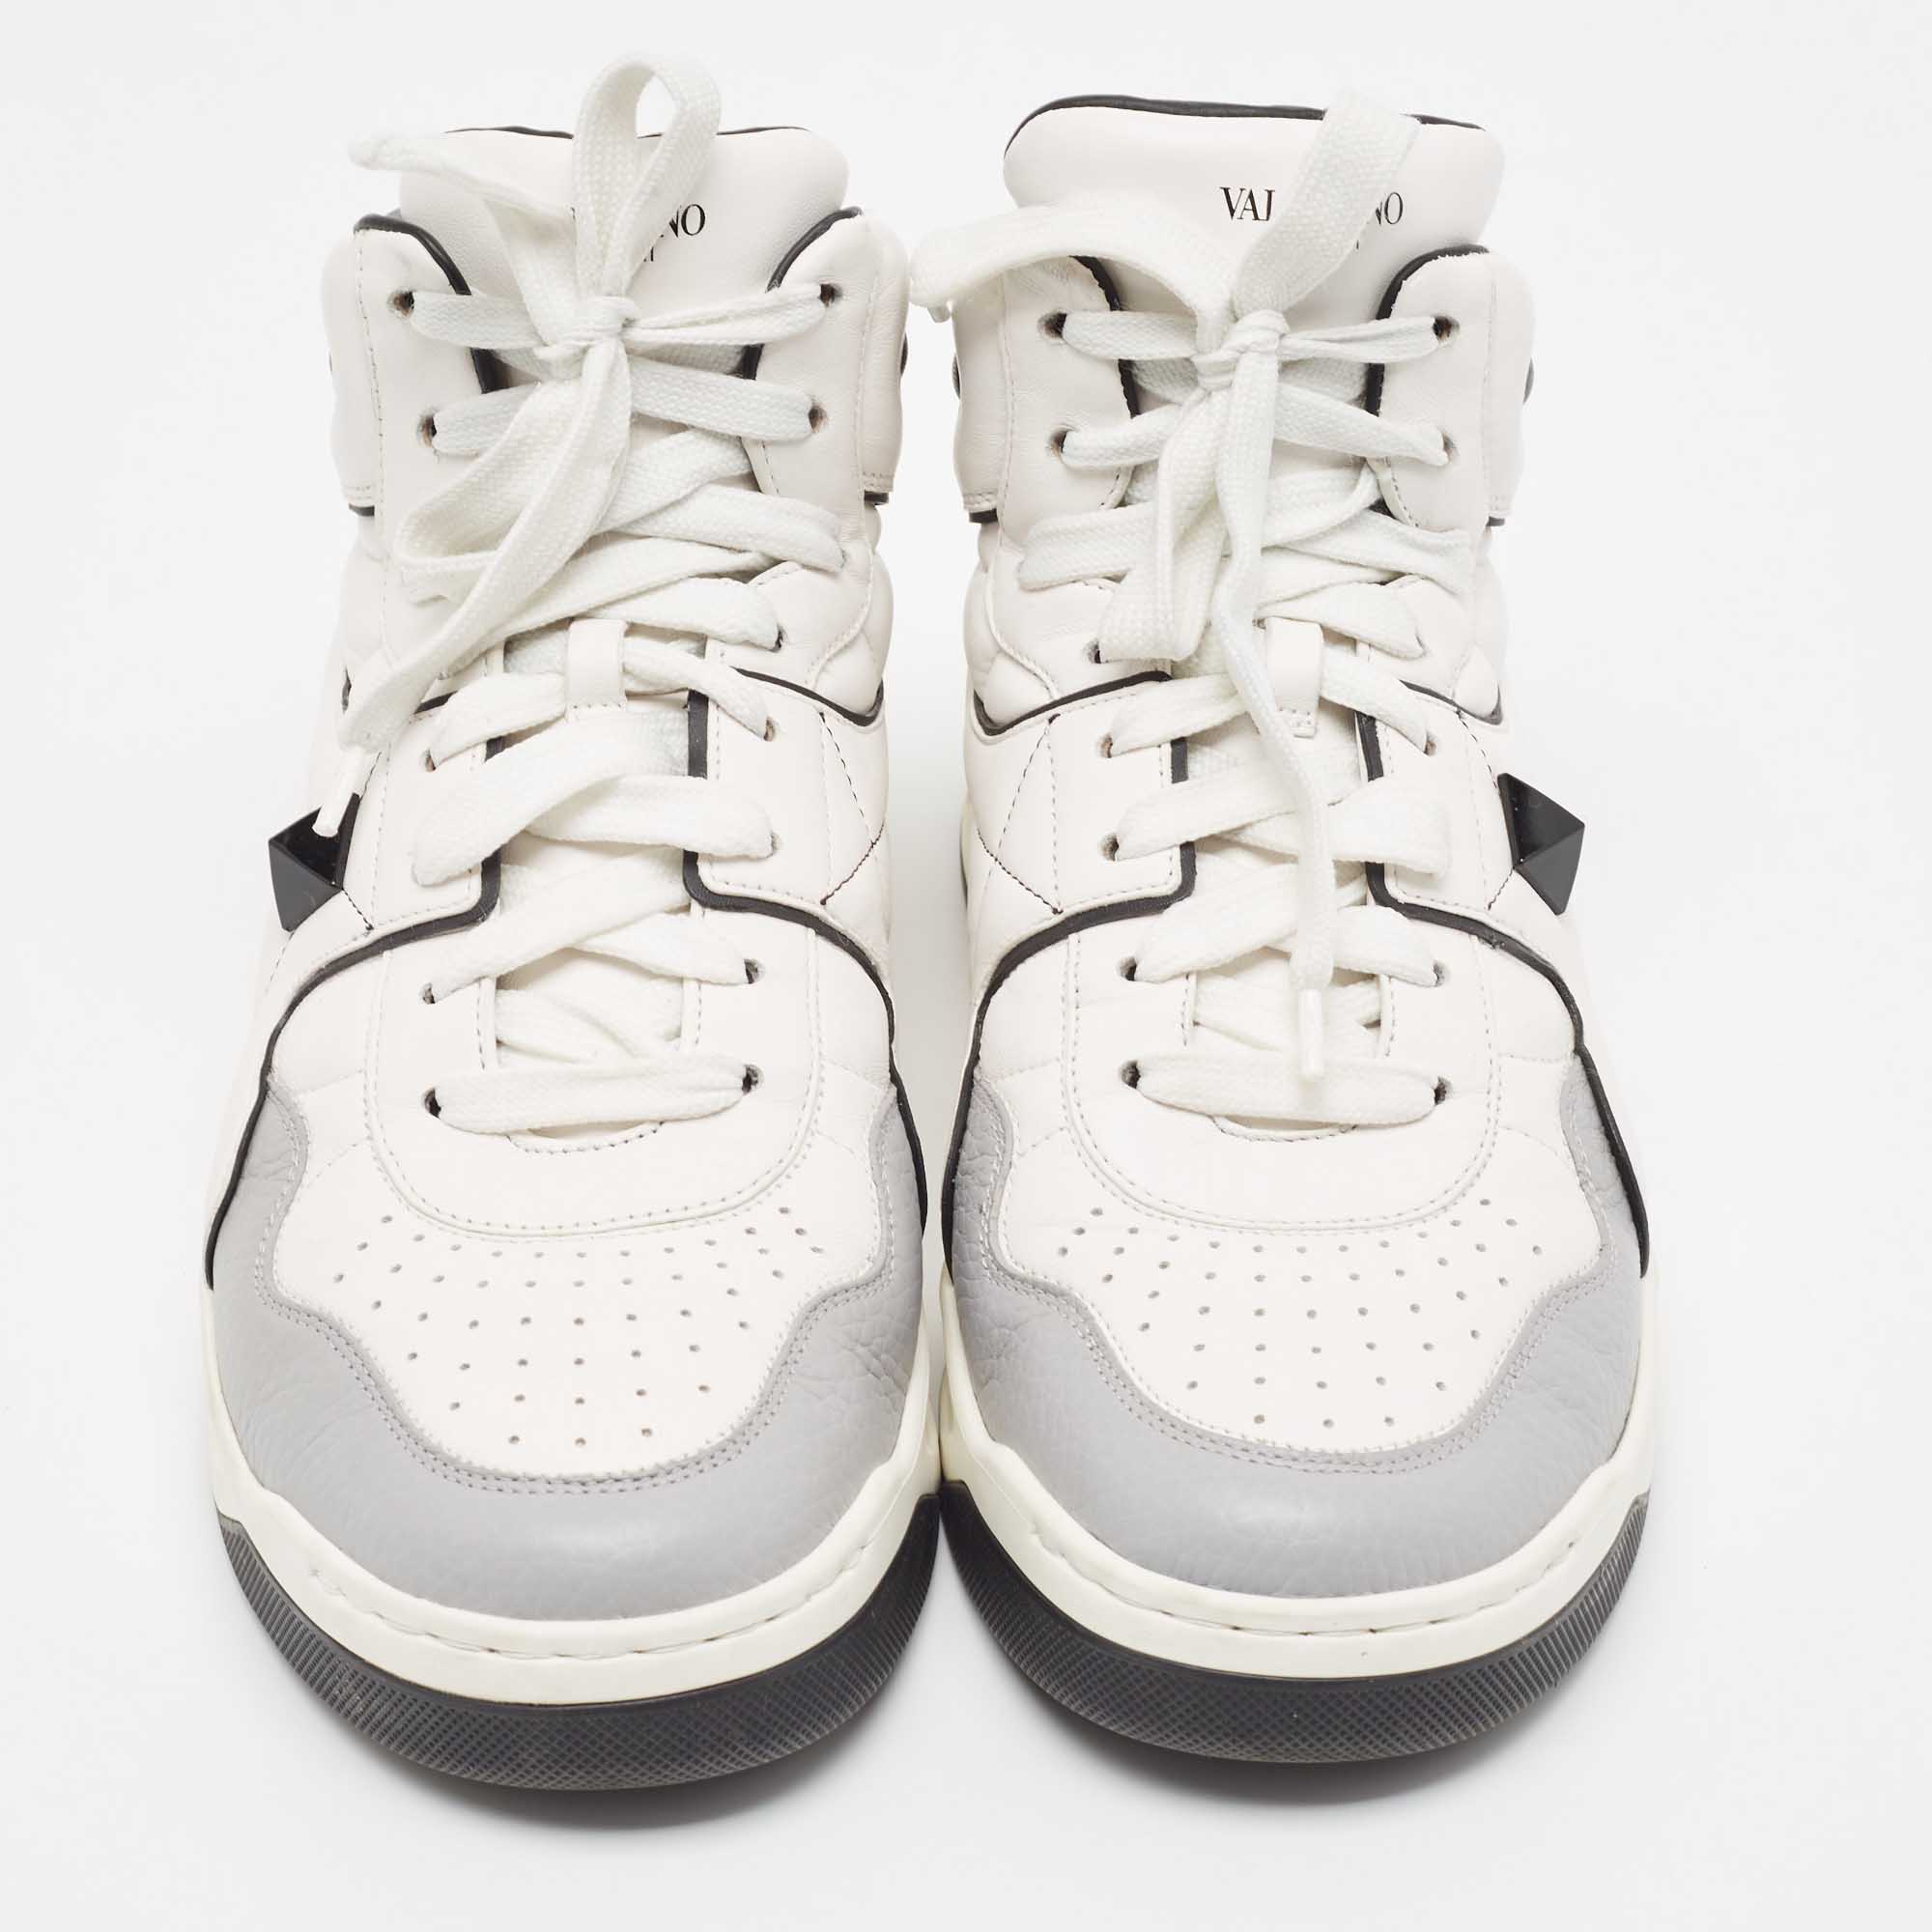 Valentino White/Black Leather Roman Stud High Top Sneakers Size 43